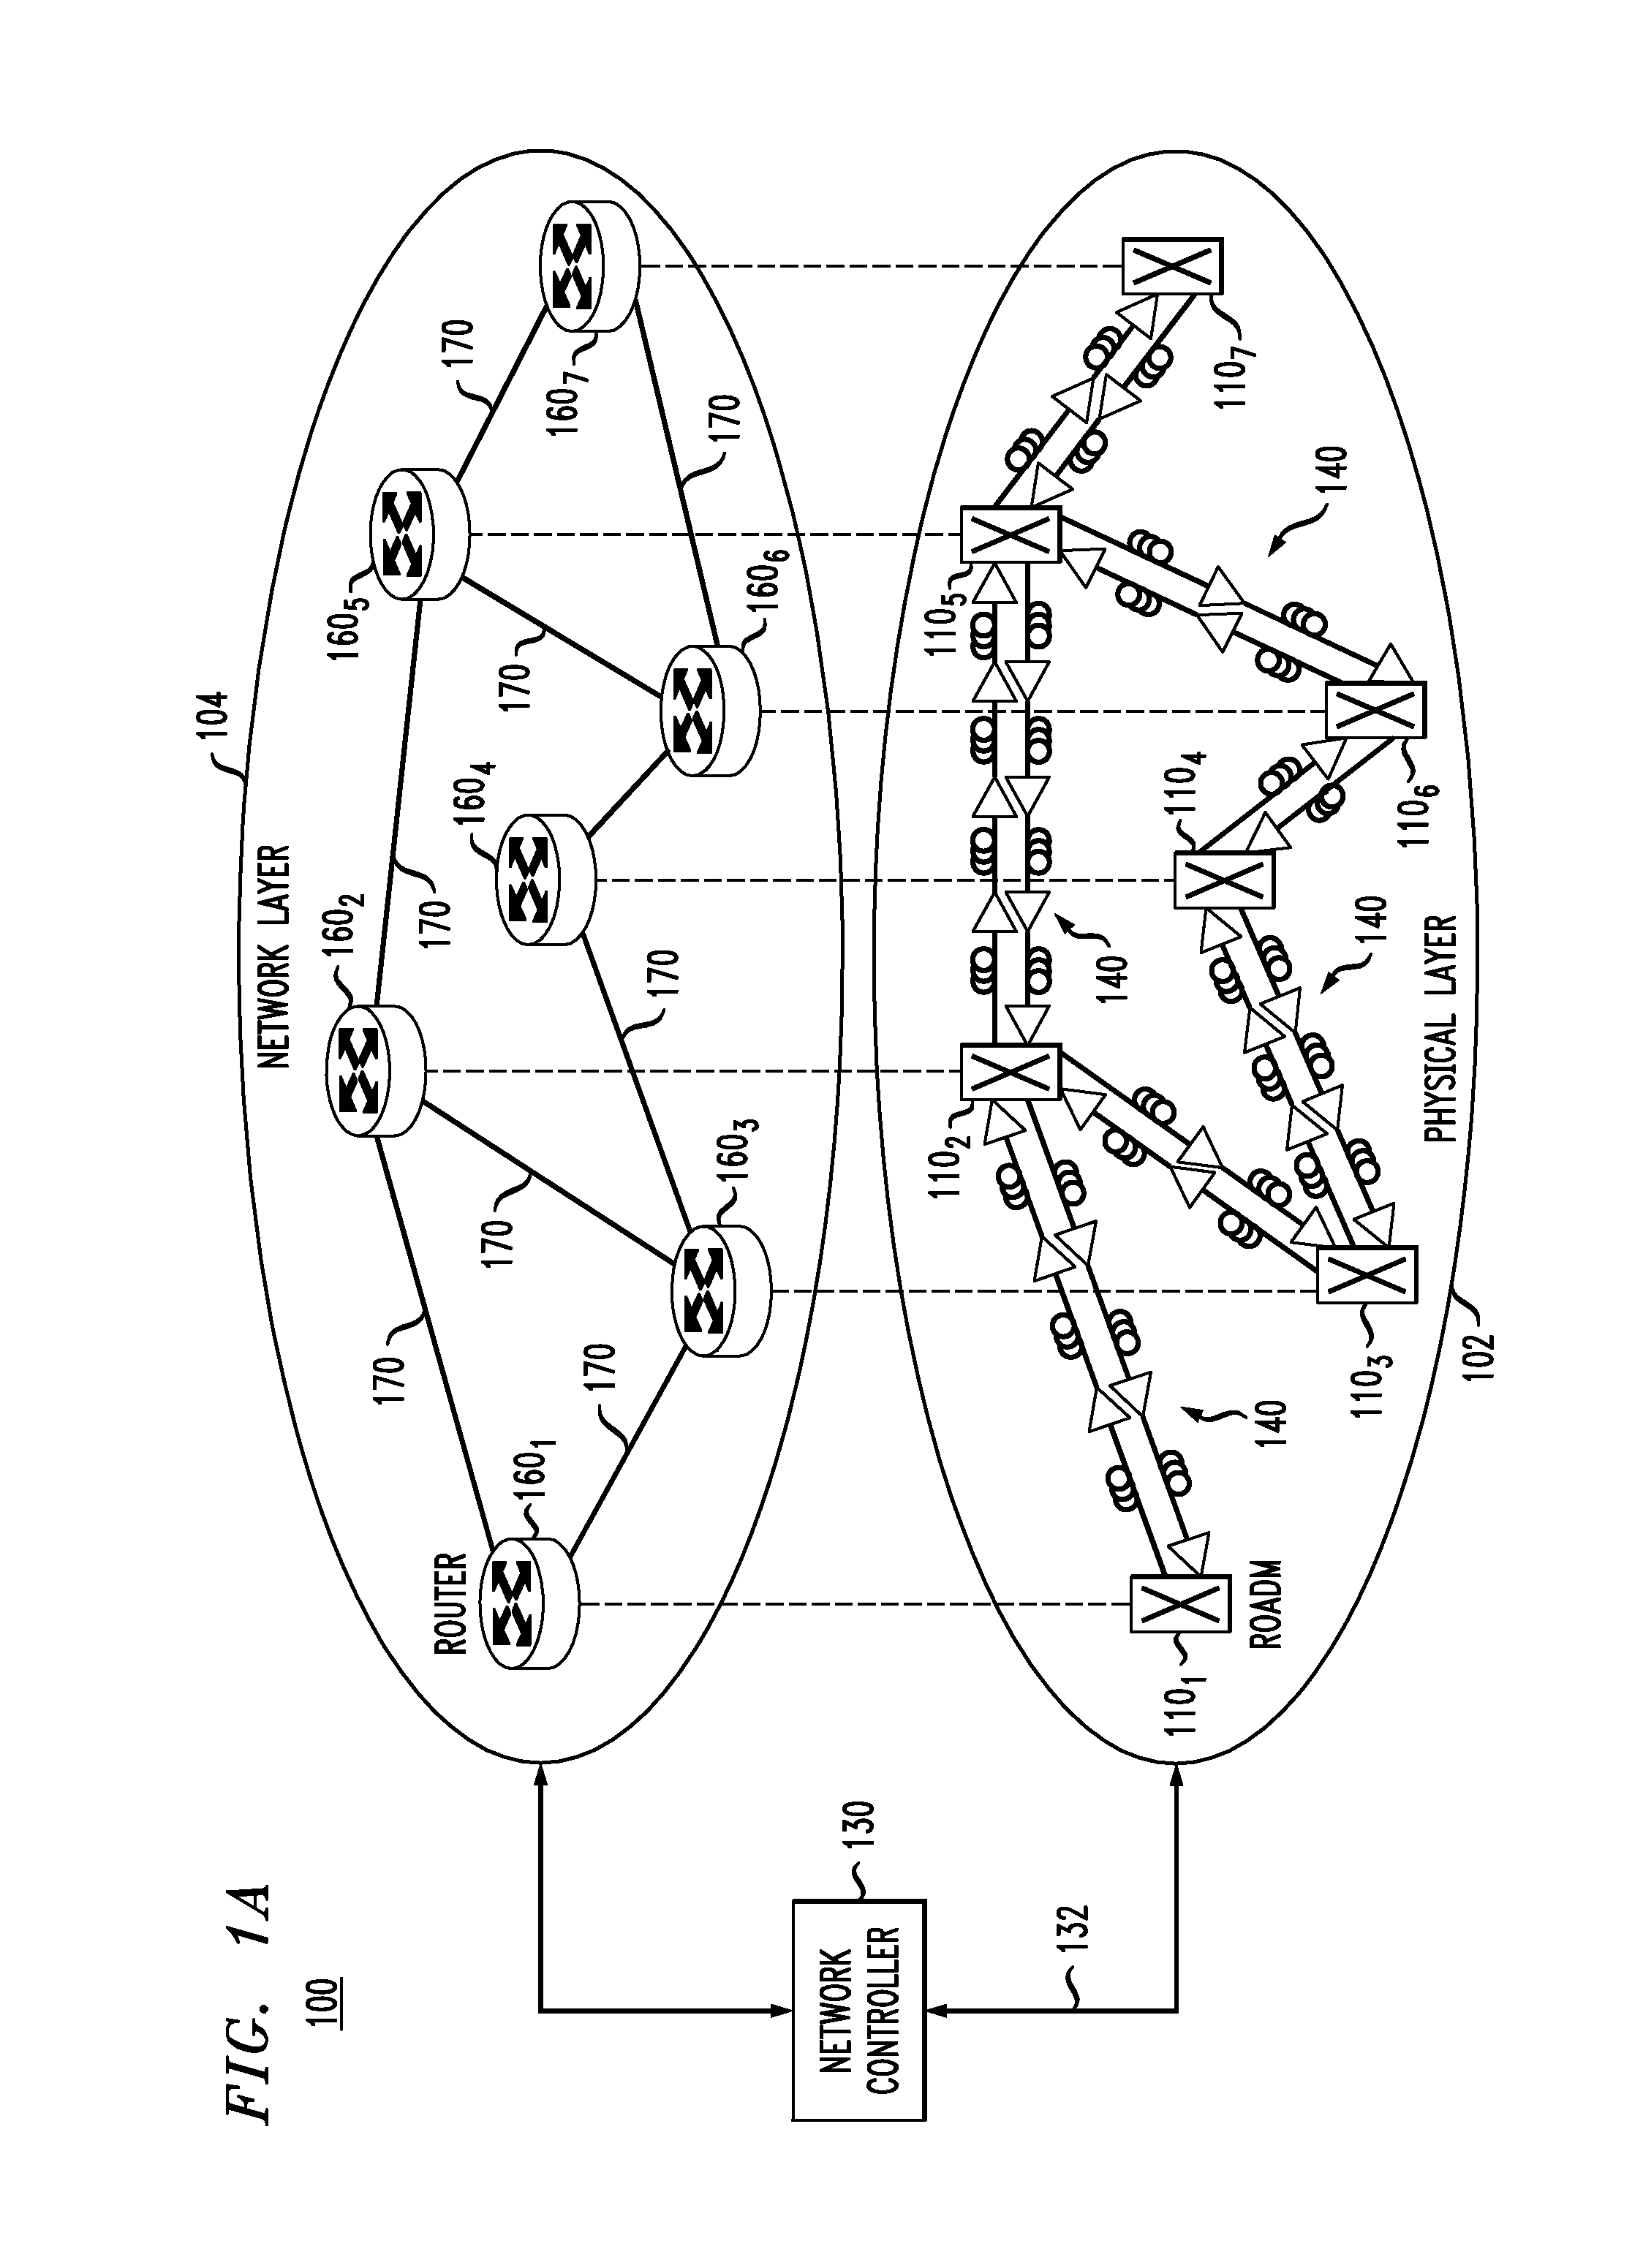 Joint signal-routing and power-control for an optical network